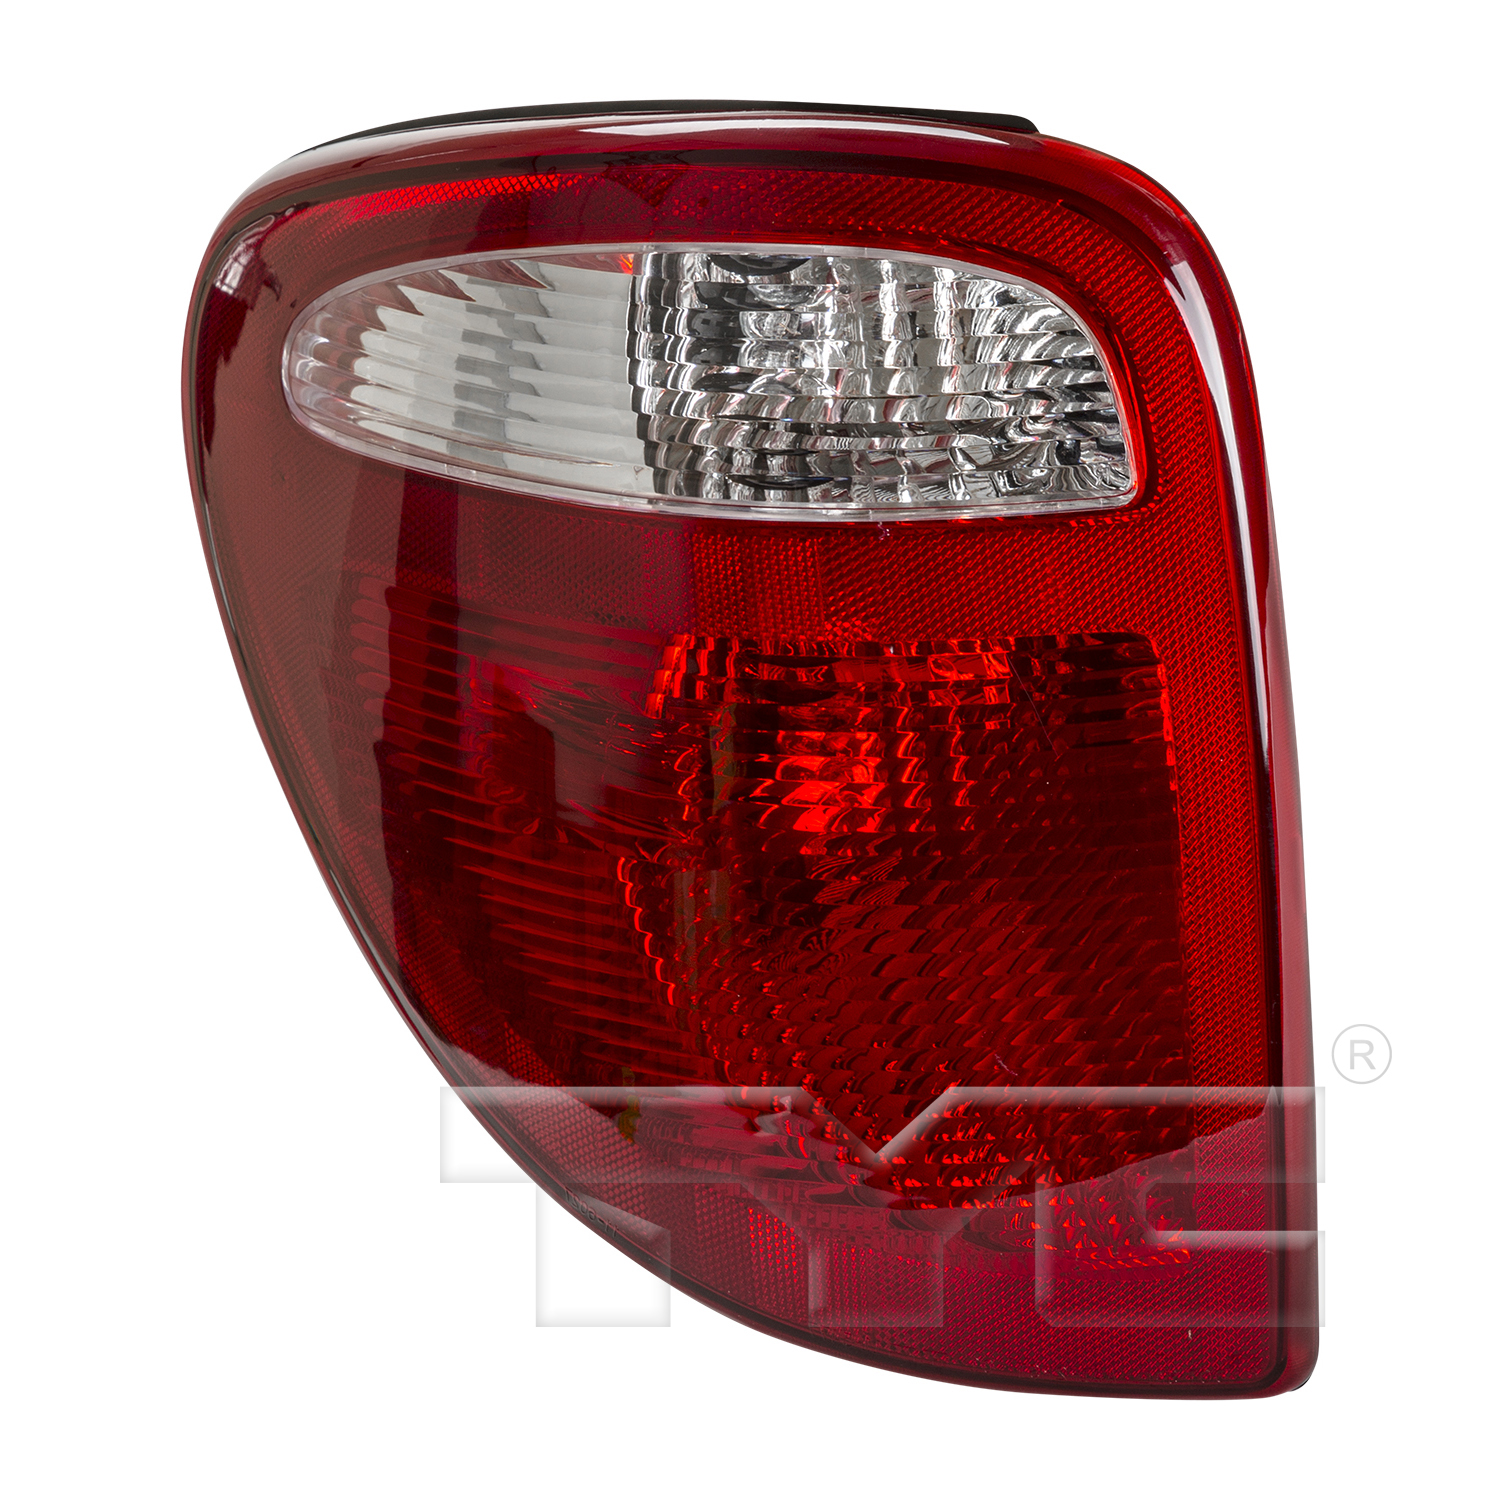 Aftermarket TAILLIGHTS for CHRYSLER - TOWN & COUNTRY, TOWN & COUNTRY,04-07,LT Taillamp assy